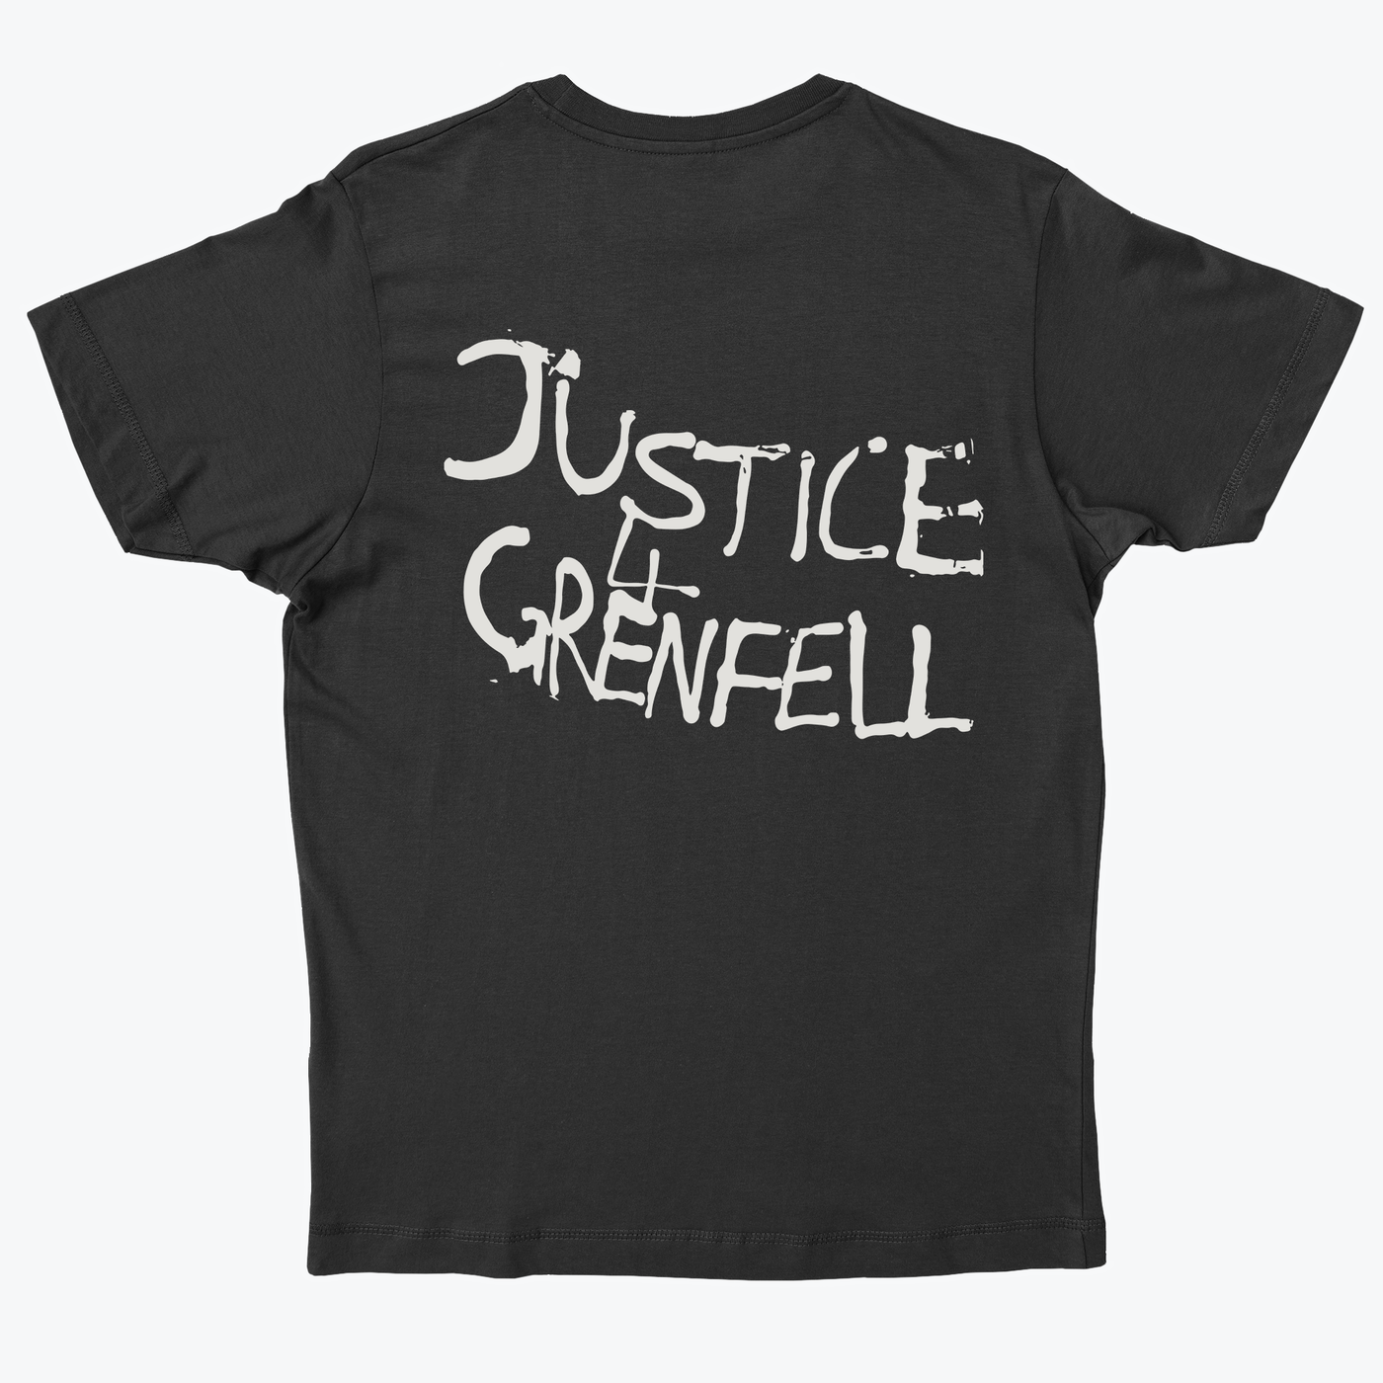 Justice4Grenfell